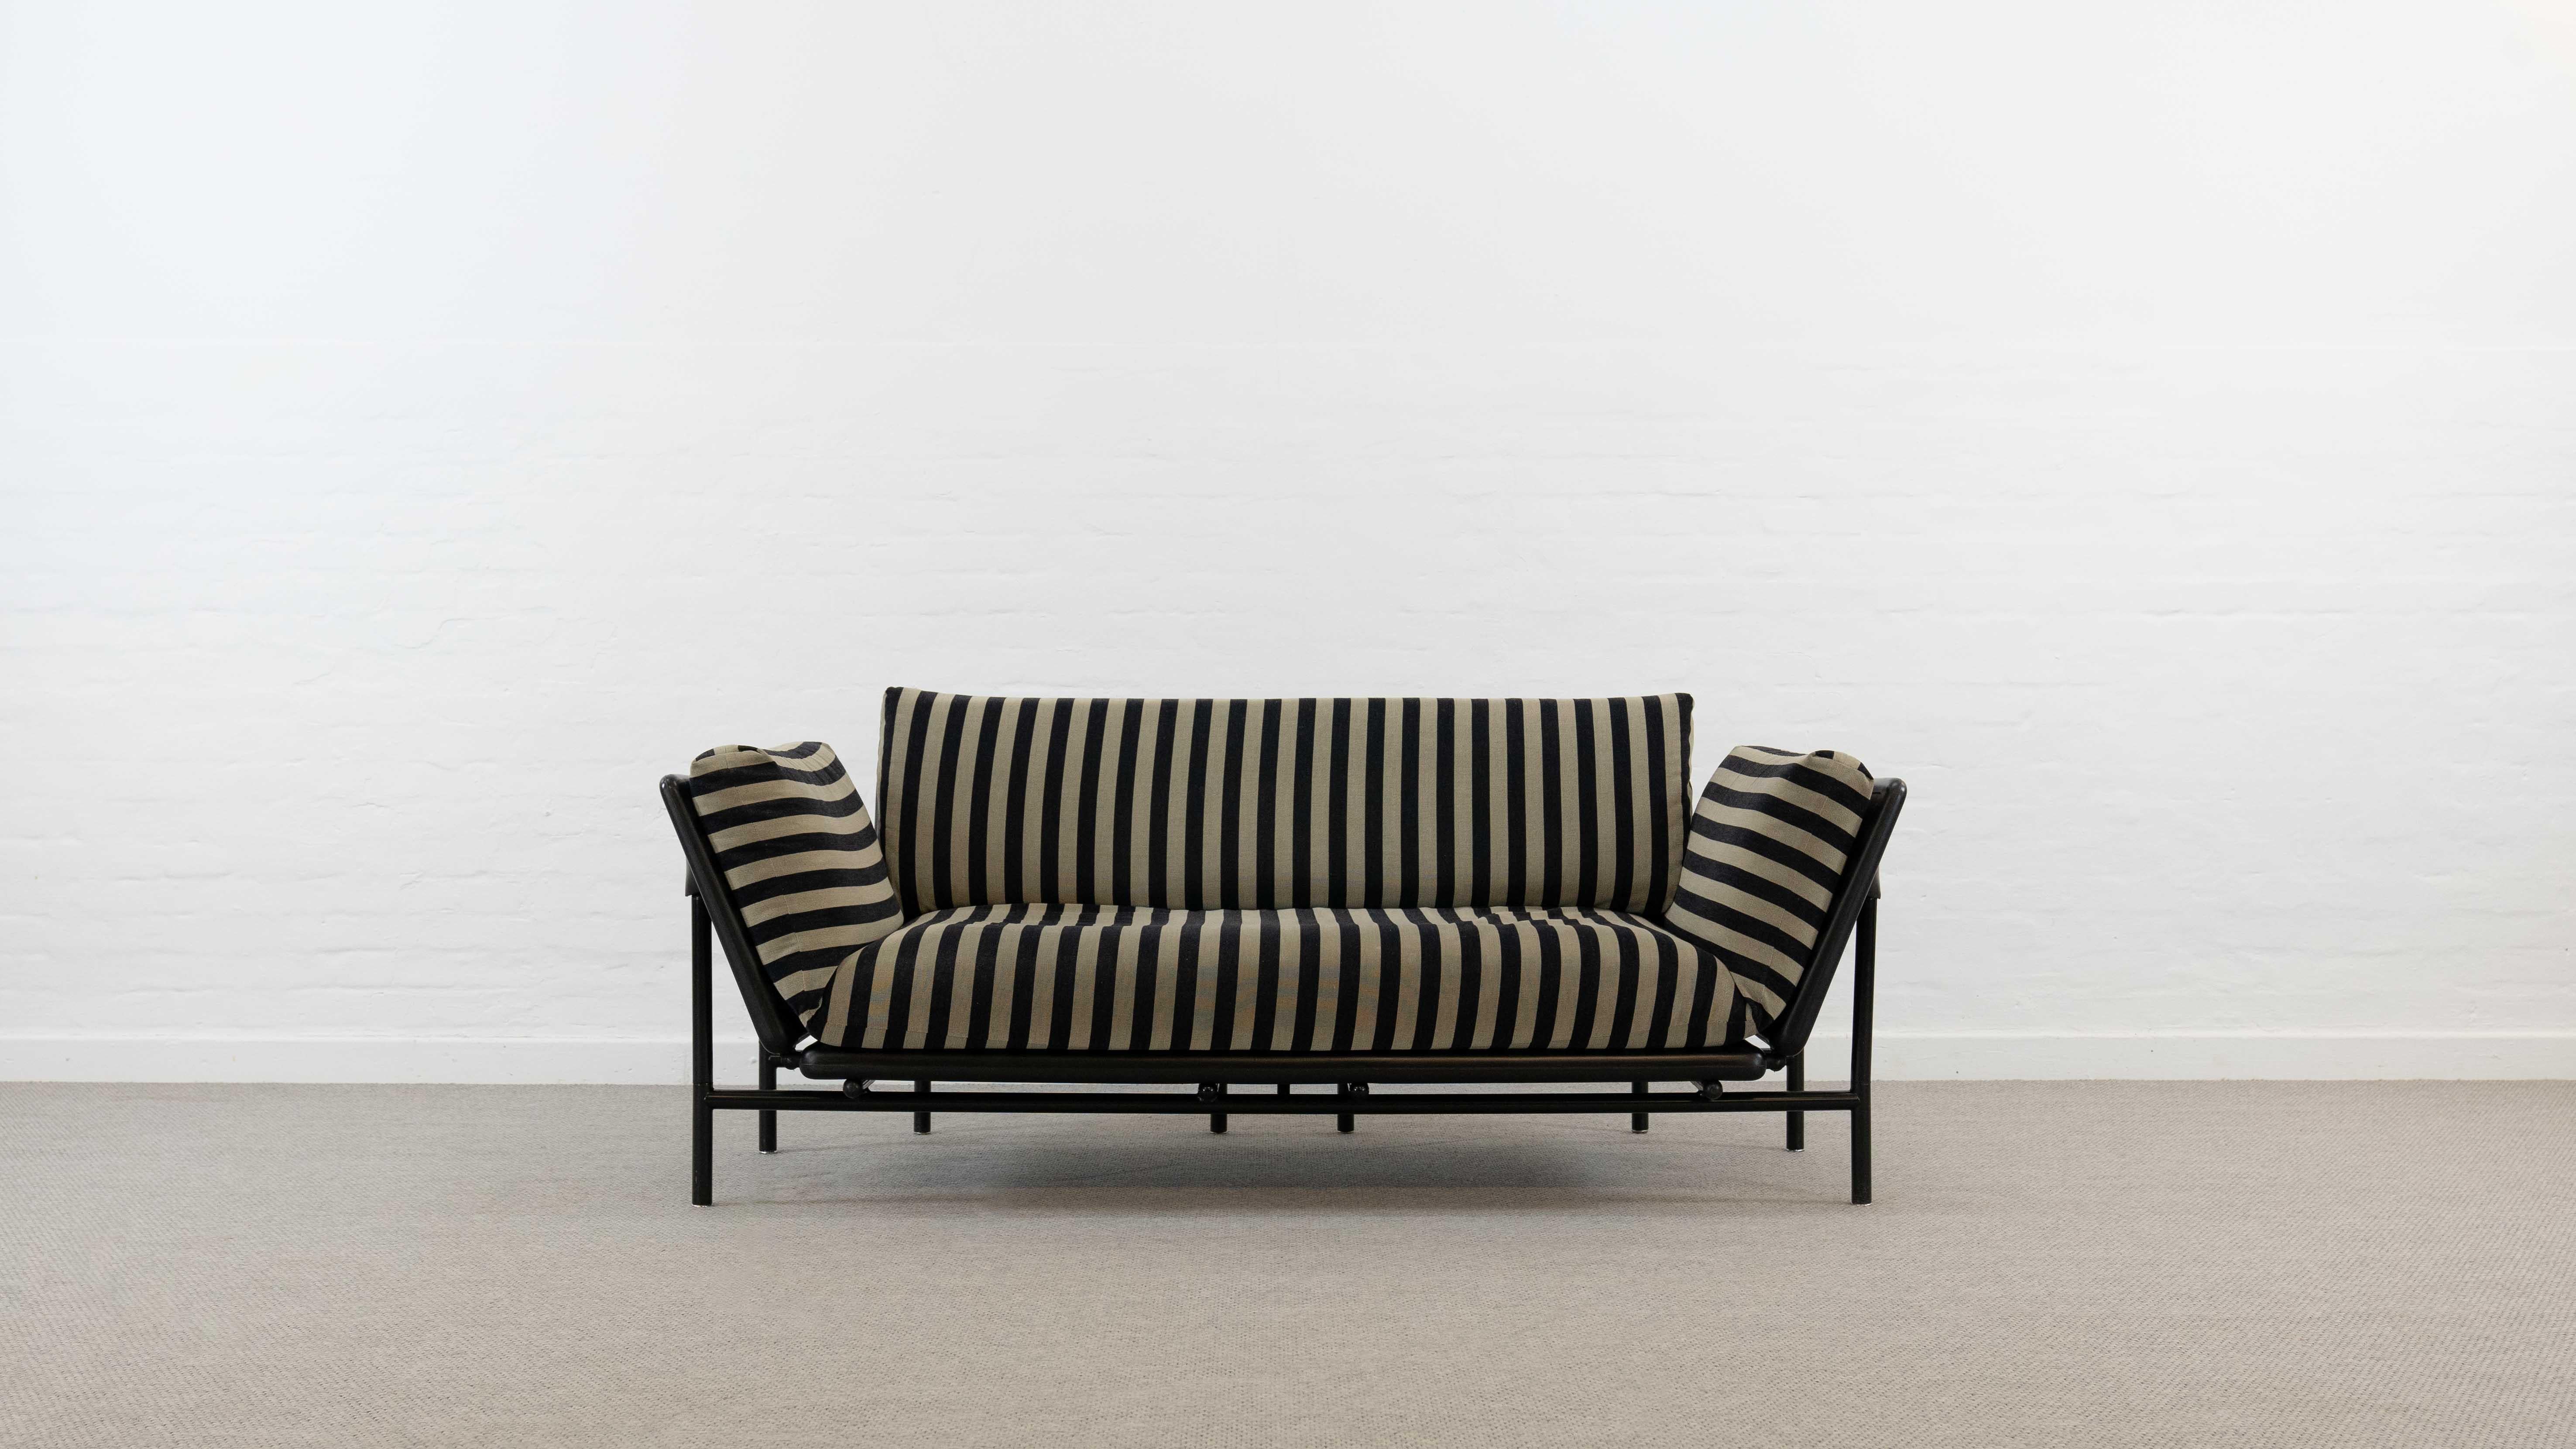 Rataplan Sofa / Daybed in grey-black striped fabrics, designed by Roberto Tapinassi for Dema, Italy in the 1980s. Both armrests can be lowered to make a horizontal reclinig surface. The lower sofa construction consists of black polyuretahne segments